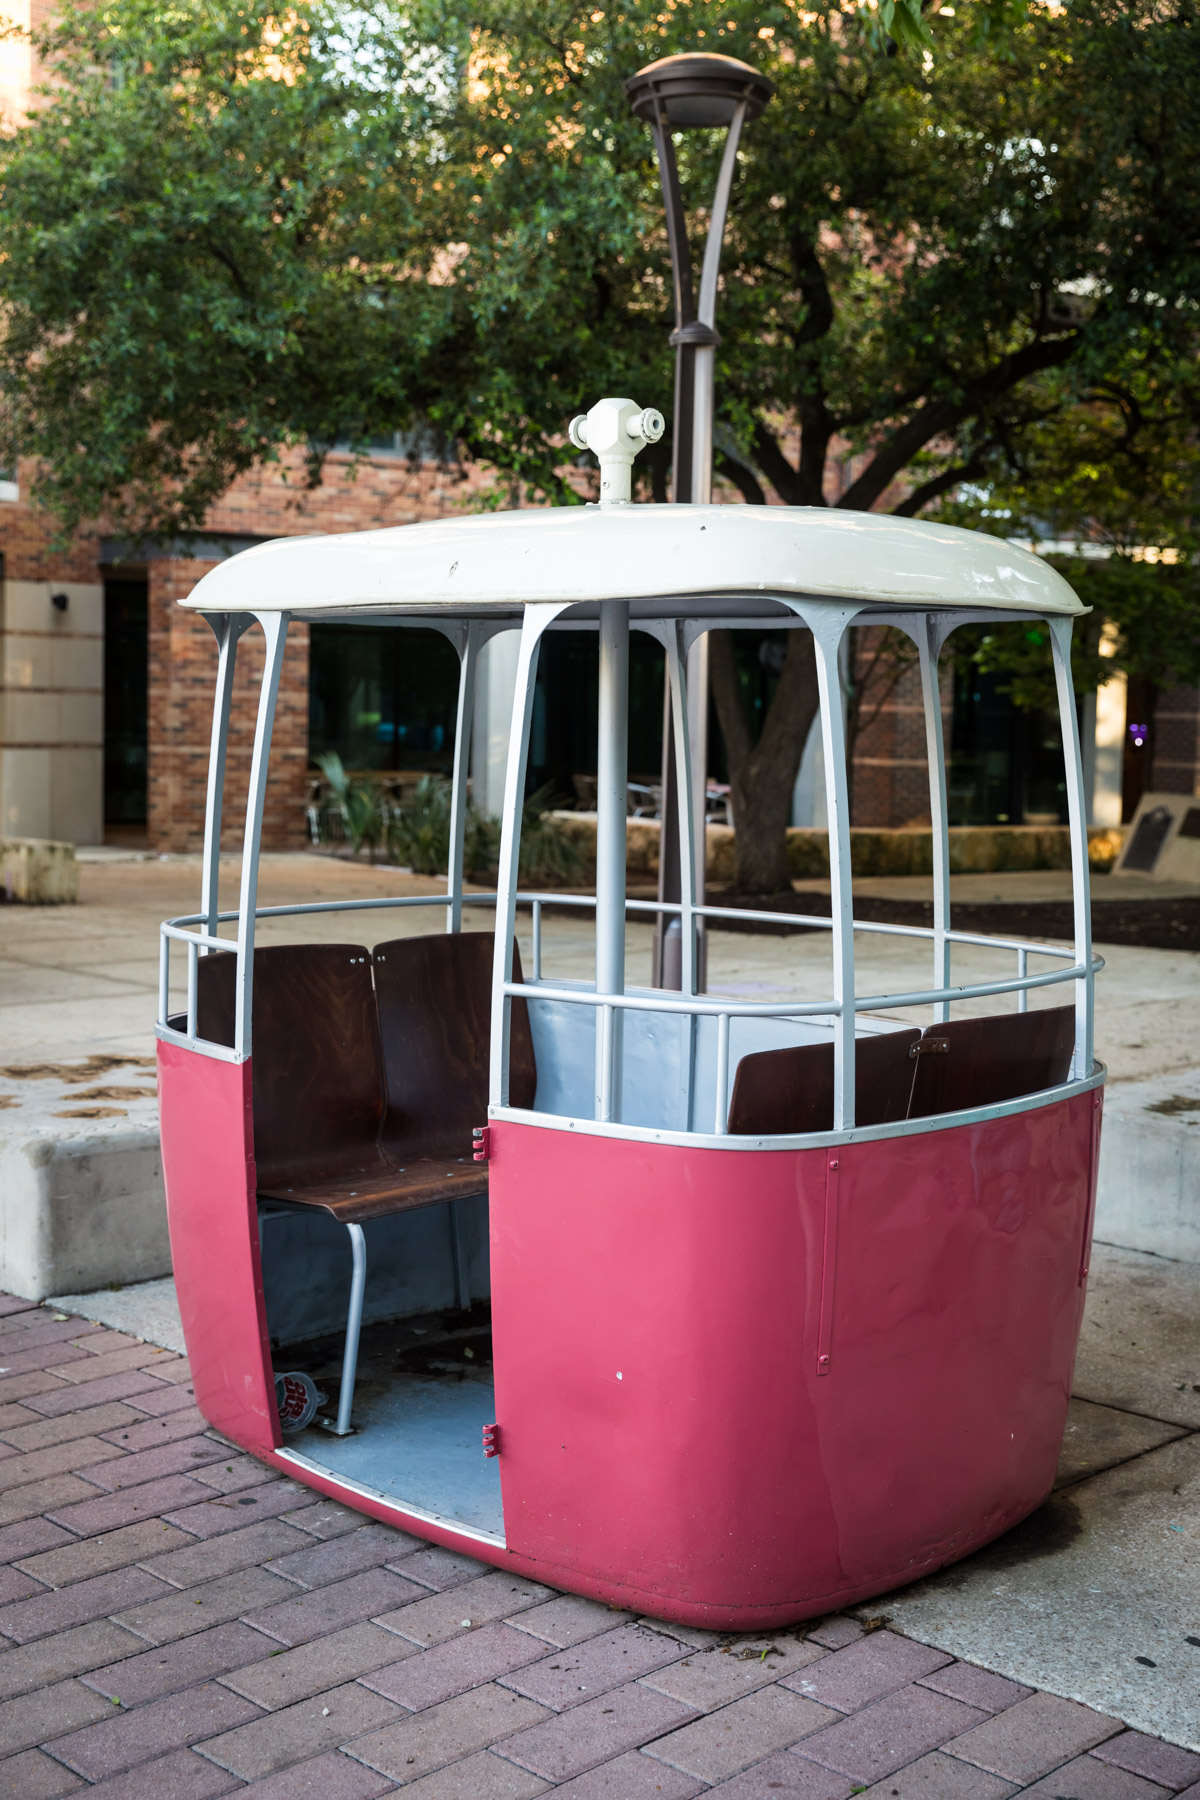 Old skyline gondola with red base in Yanaguana Garden in Hemisfair for an article on the perfect downtown San Antonio family portrait itinerary